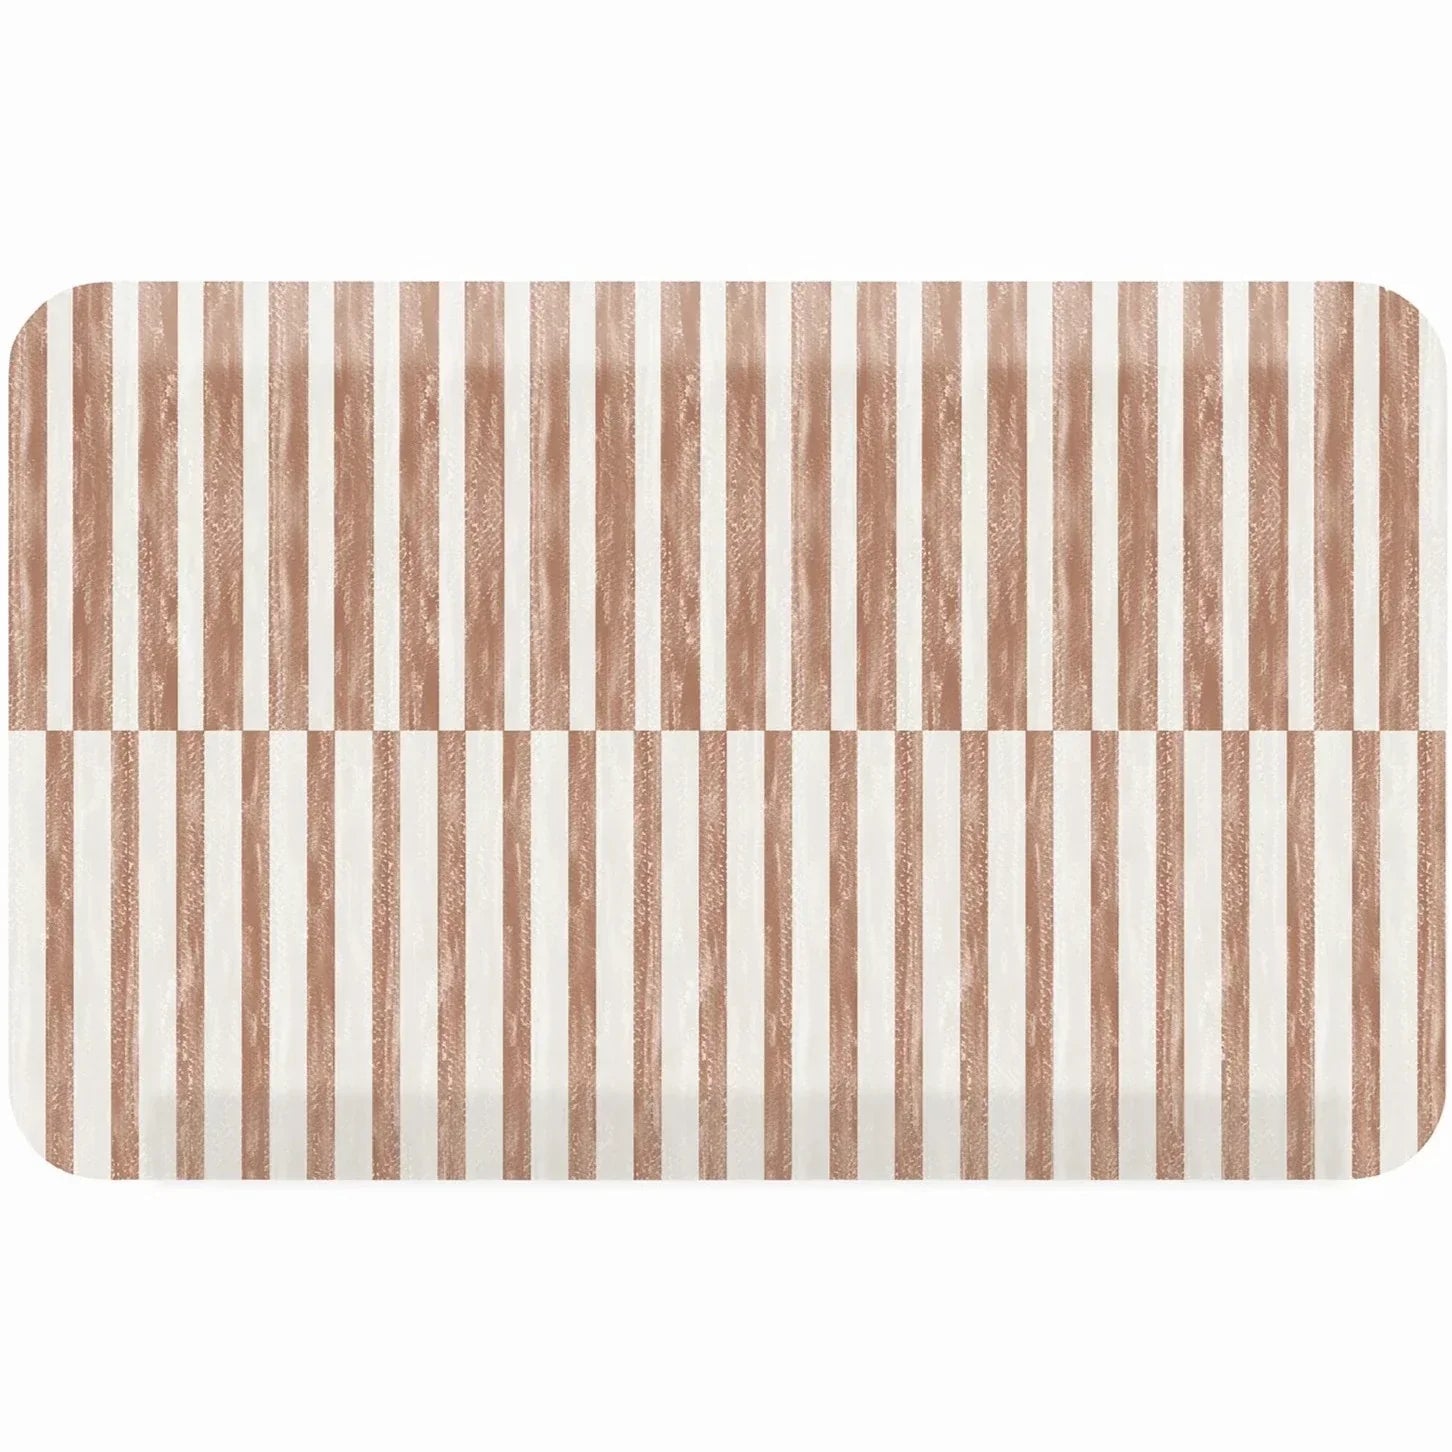 Reese terracotta brown and white inverted stripe standing mat shown in size 20x32